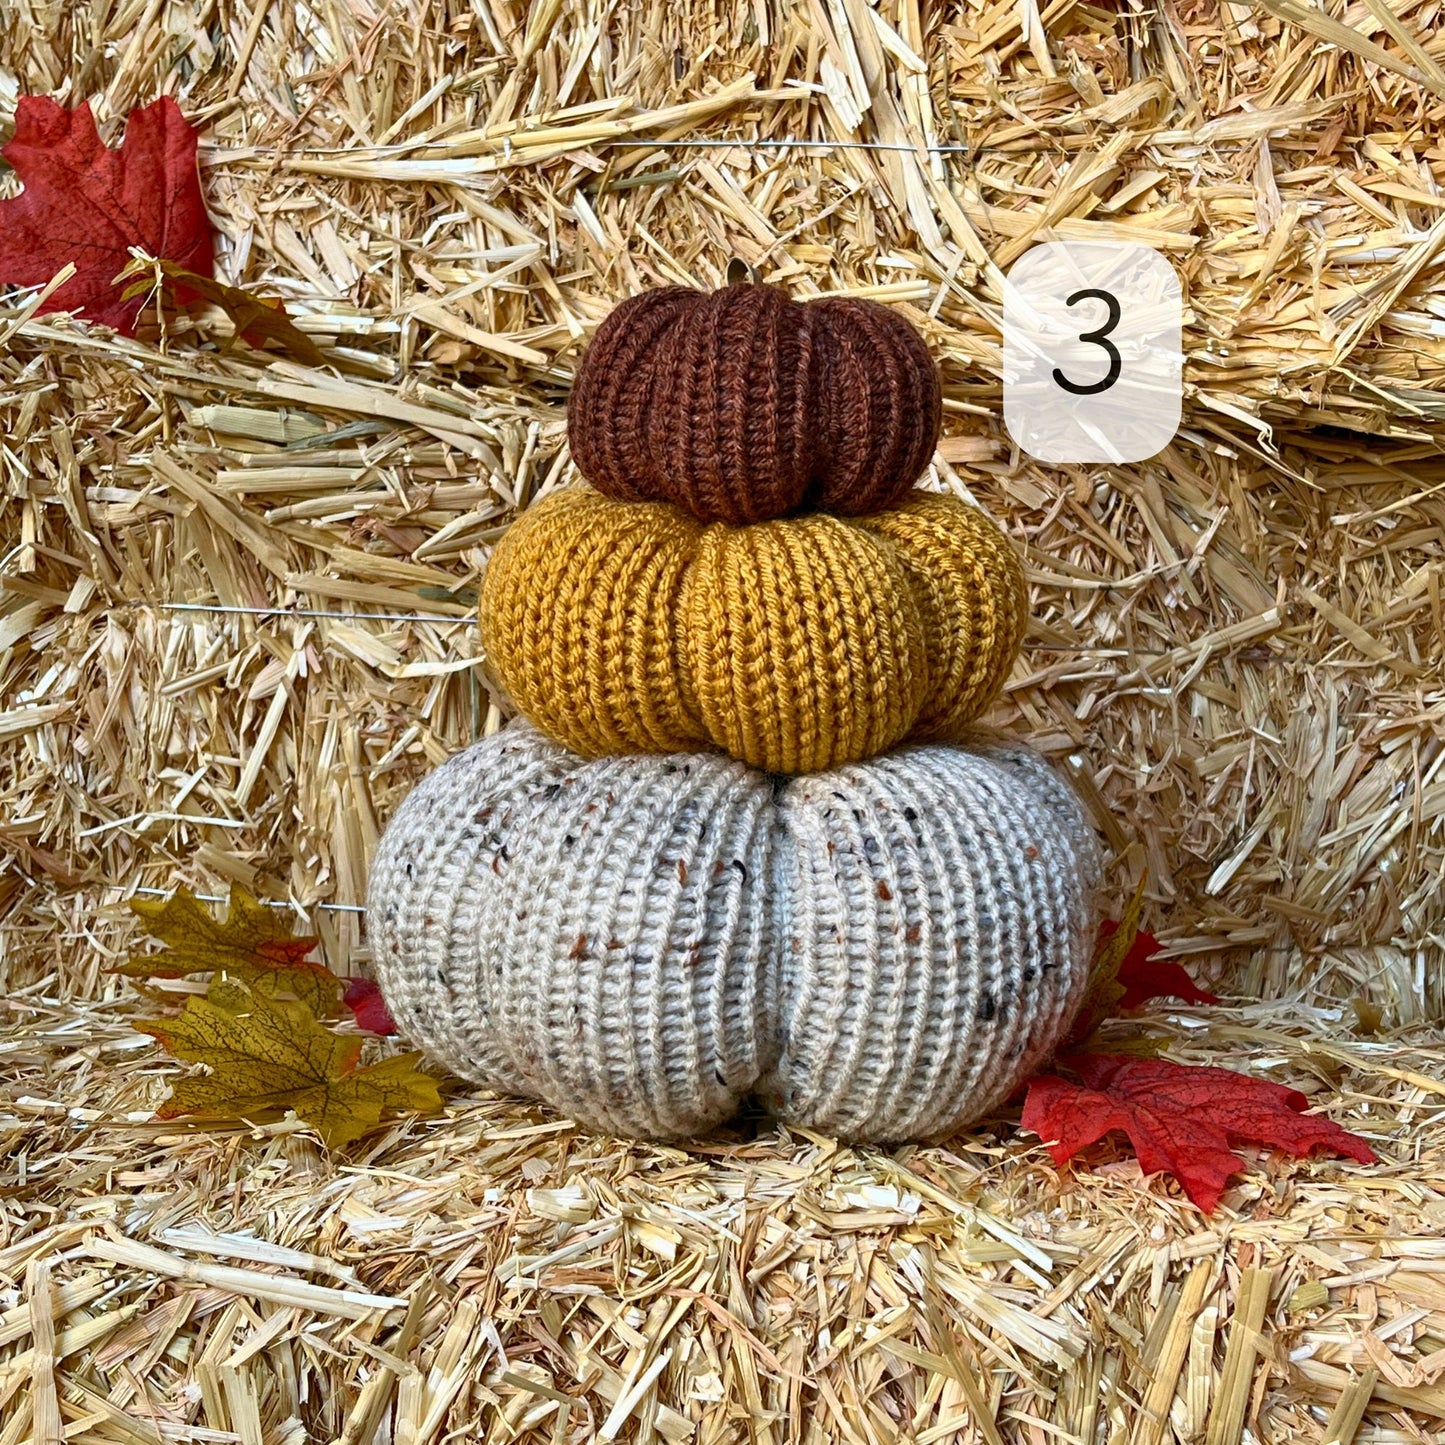 Fall Pumpkins / All Natural Autumn Tiered Tray Decor / Rustic Farmhouse Decorations